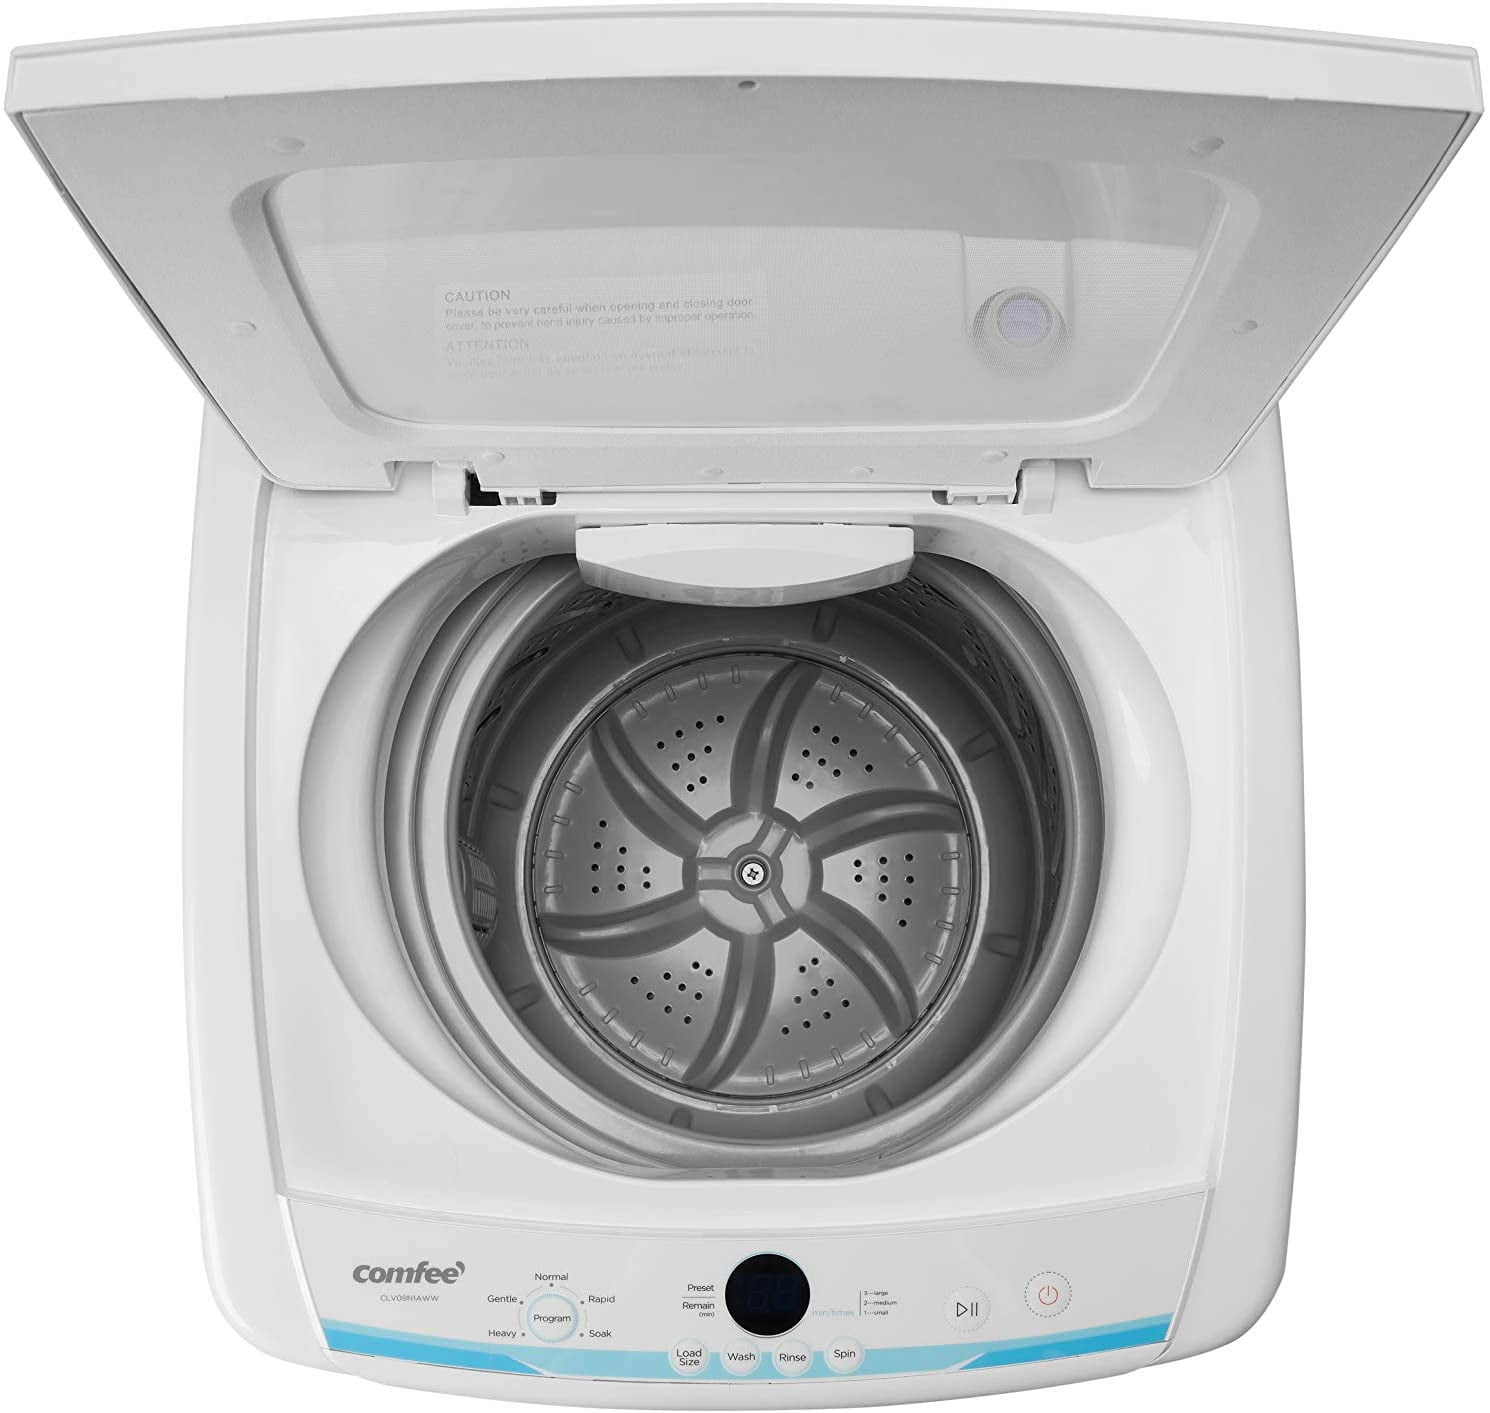 COMFEE' Portable Washing Machine, 0.9 cu.ft Compact Washer With LED  Display, 5 Wash Cycles, 2 Built-in Rollers, Space Saving Full-Automatic  Washer, Ideal Laundry for RV, Dorm, Apartment, Ivory White 